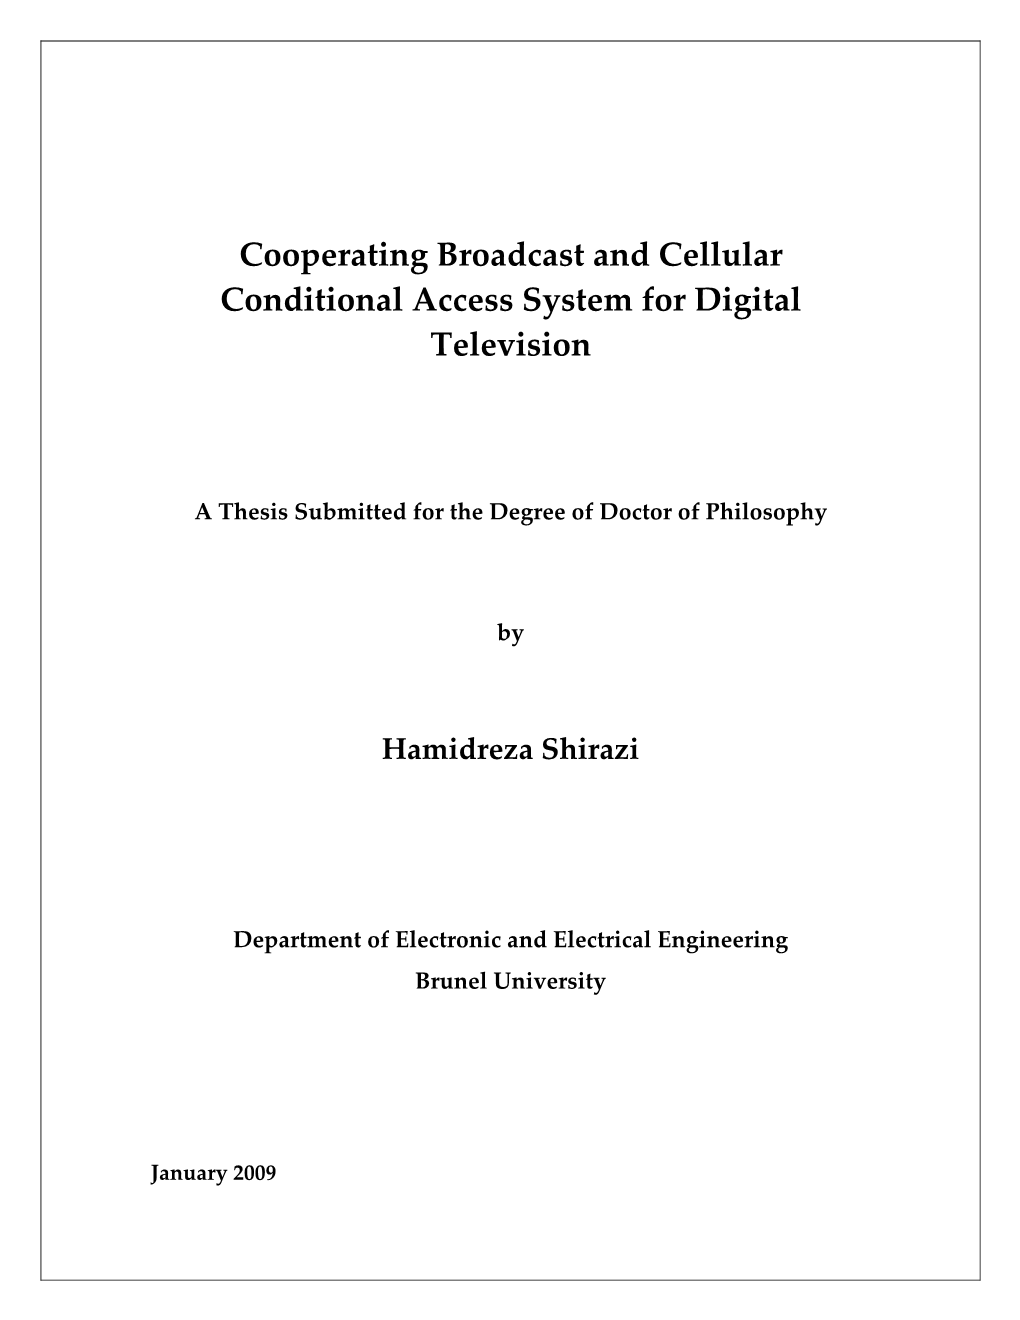 Cooperating Broadcast and Cellular Conditional Access System for Digital Television